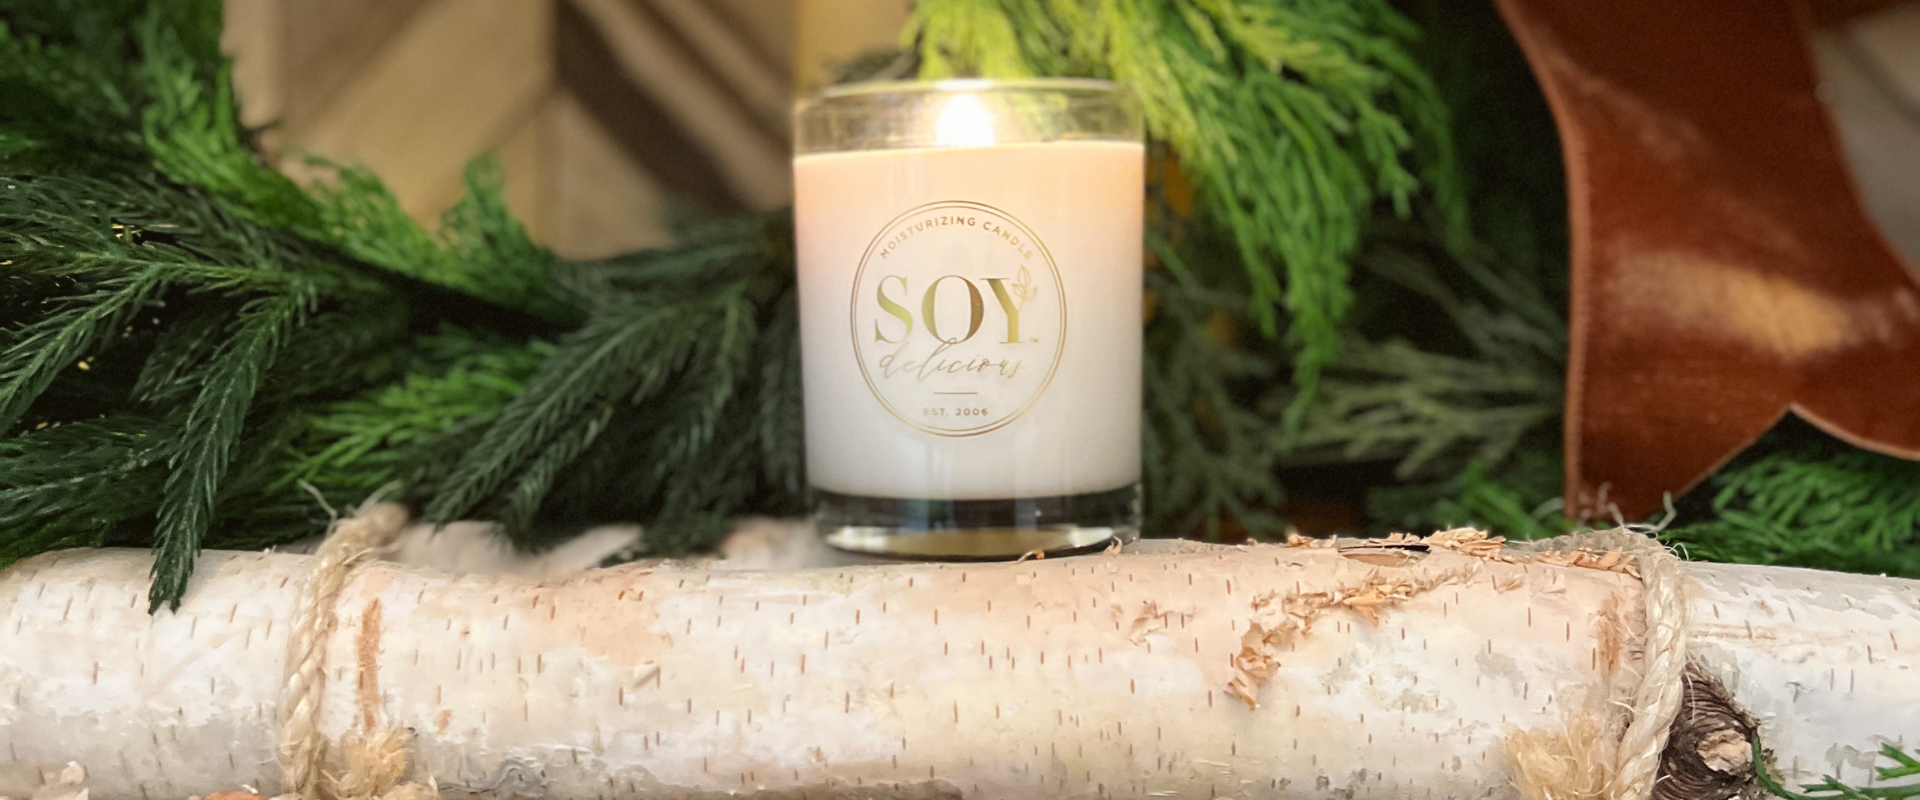 Choosing the Right Candle Scent to Neutralize Unwanted Odors